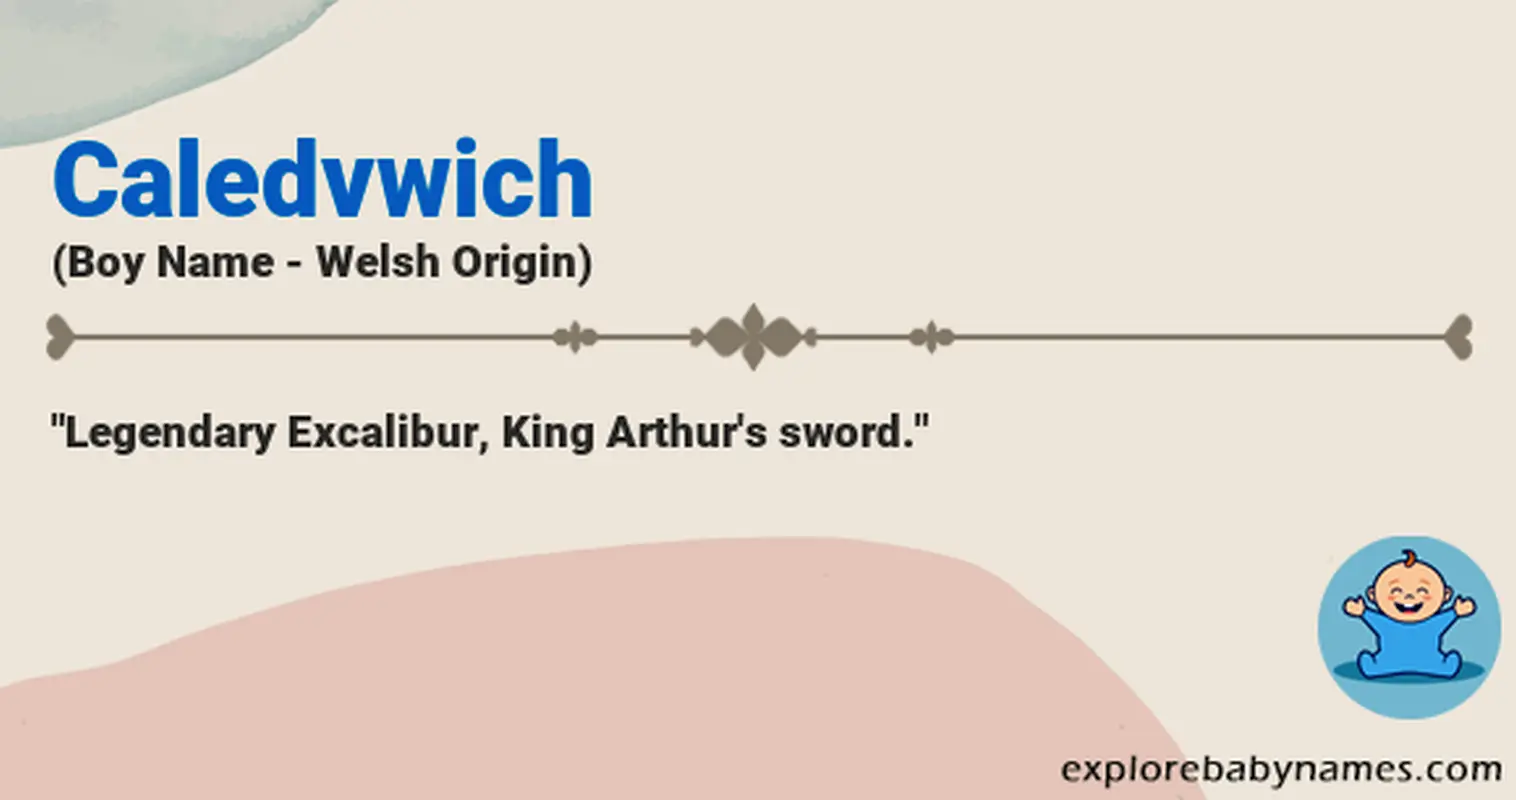 Meaning of Caledvwich